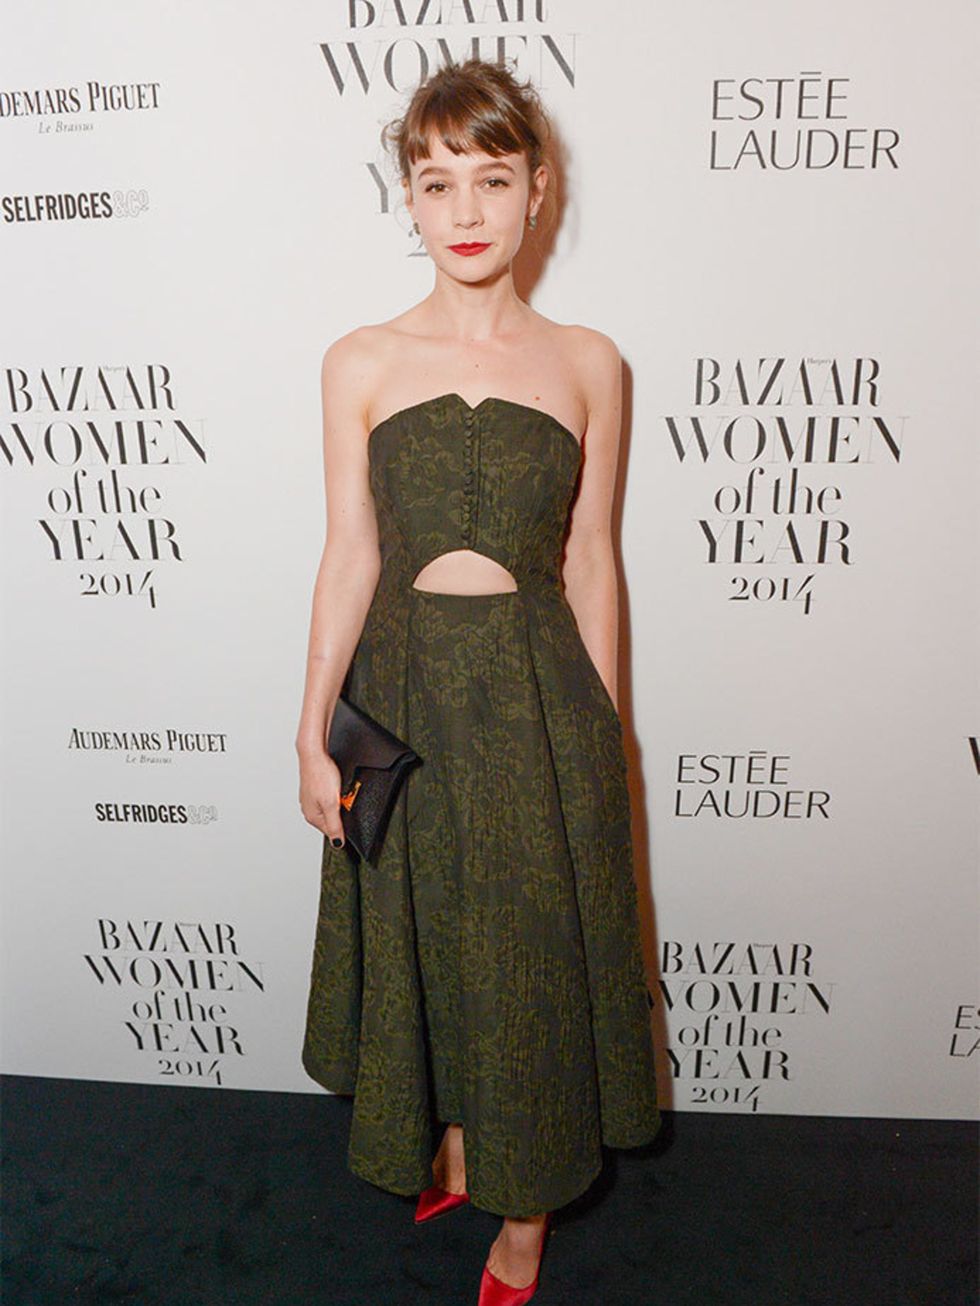 <p><a href="http://www.elleuk.com/fashion/celebrity-style/carey-mulligan-s-style-file">Carey Mulligan</a> wore Erdem s/s 2015 dress and Sophia Webster shoes&nbsp;to the Harper&#39;s Bazaar Women Of The Year Awards 2014.</p>